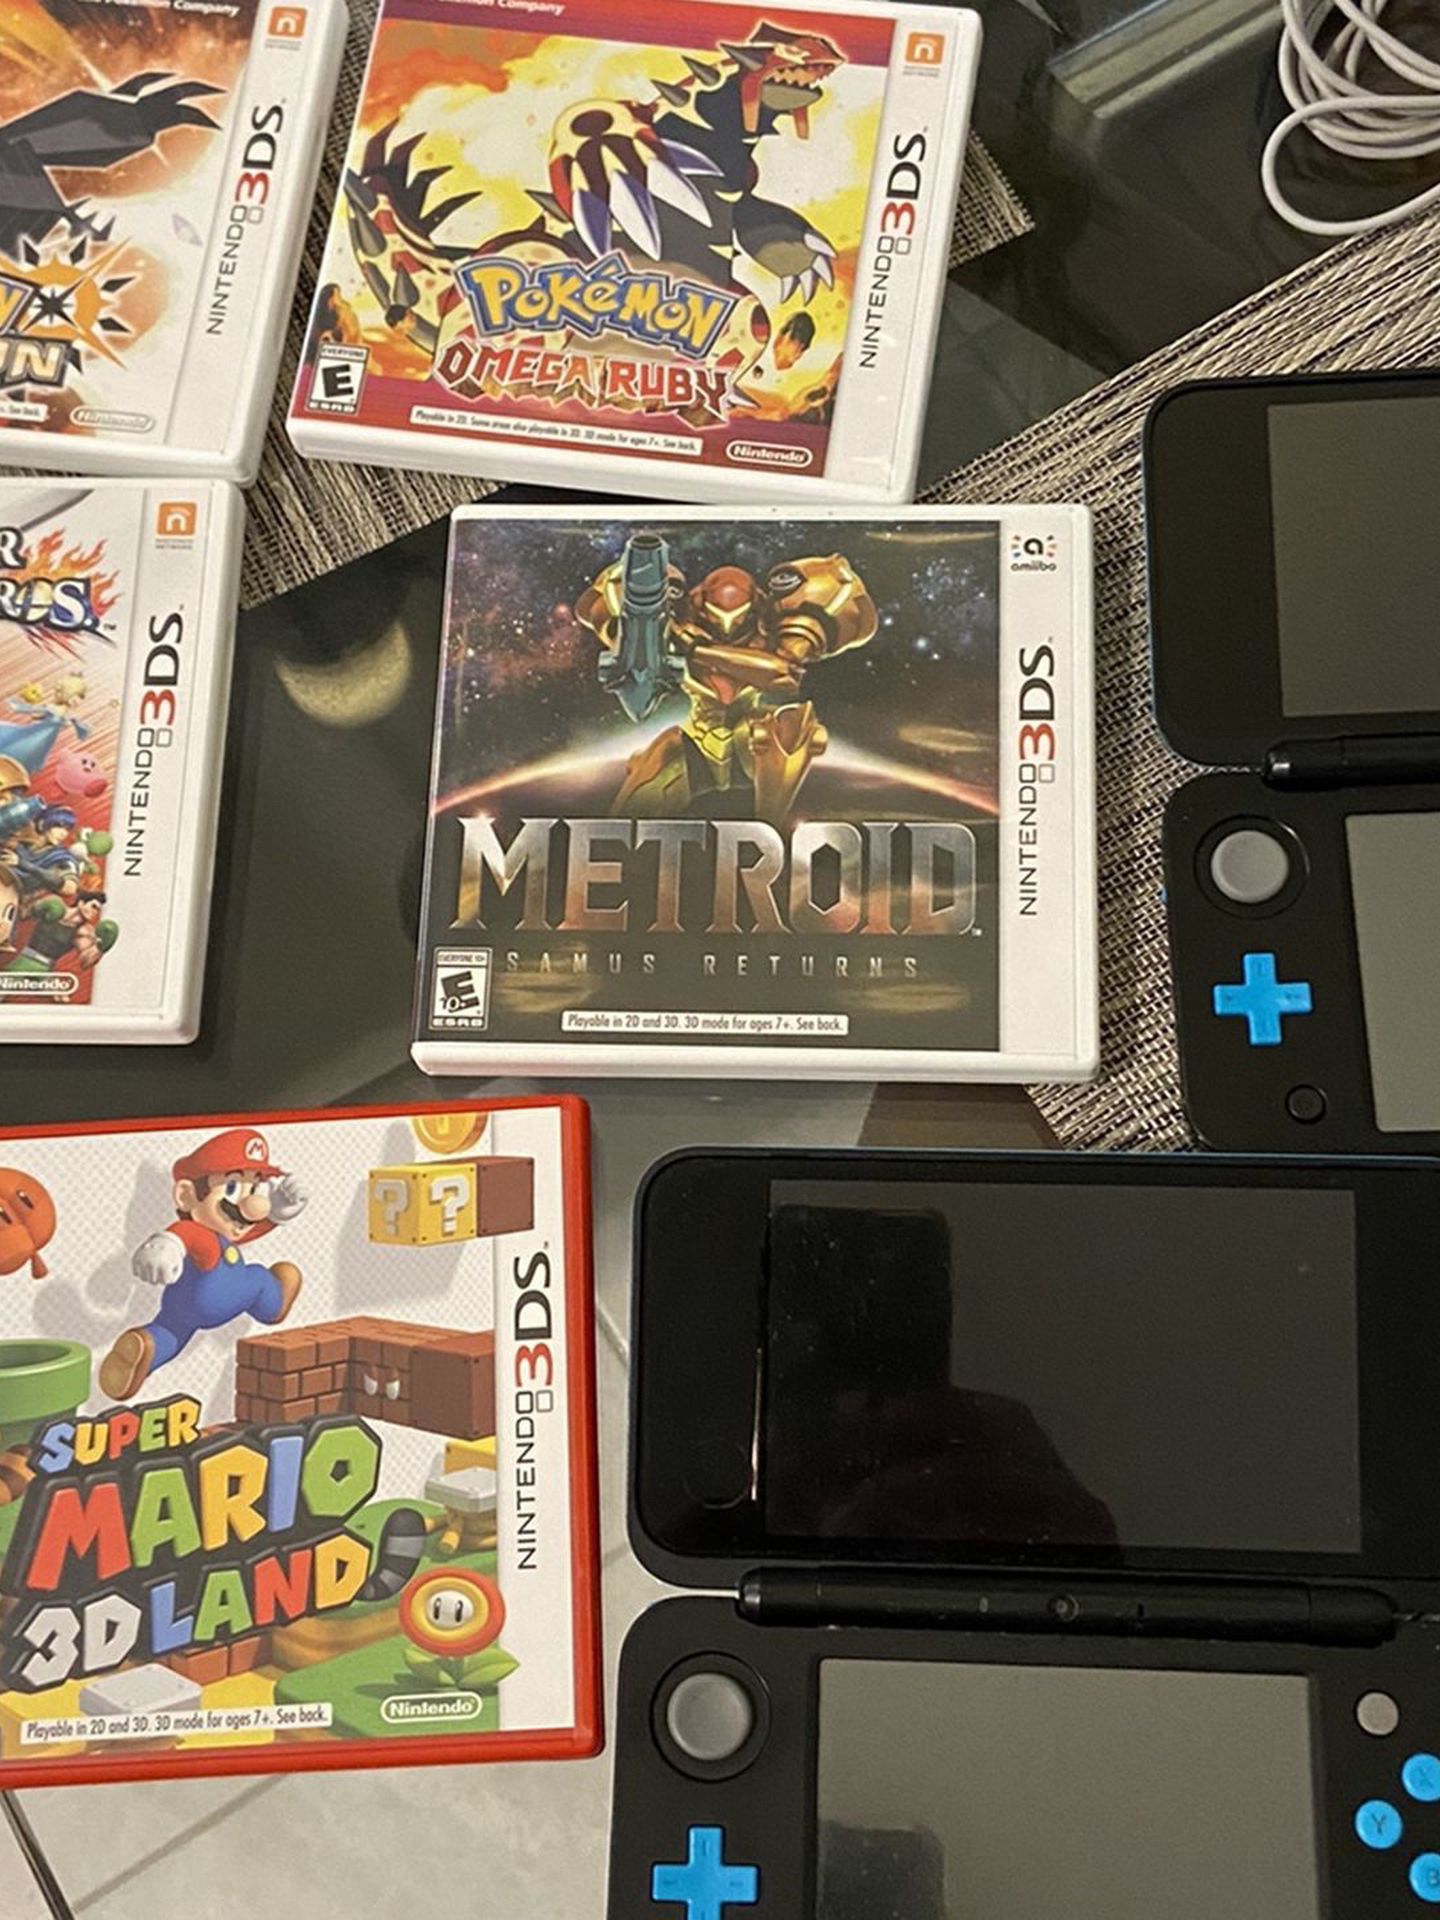 2 Nintendo DS With 6 Games, One With Mariokart 7 Loaded